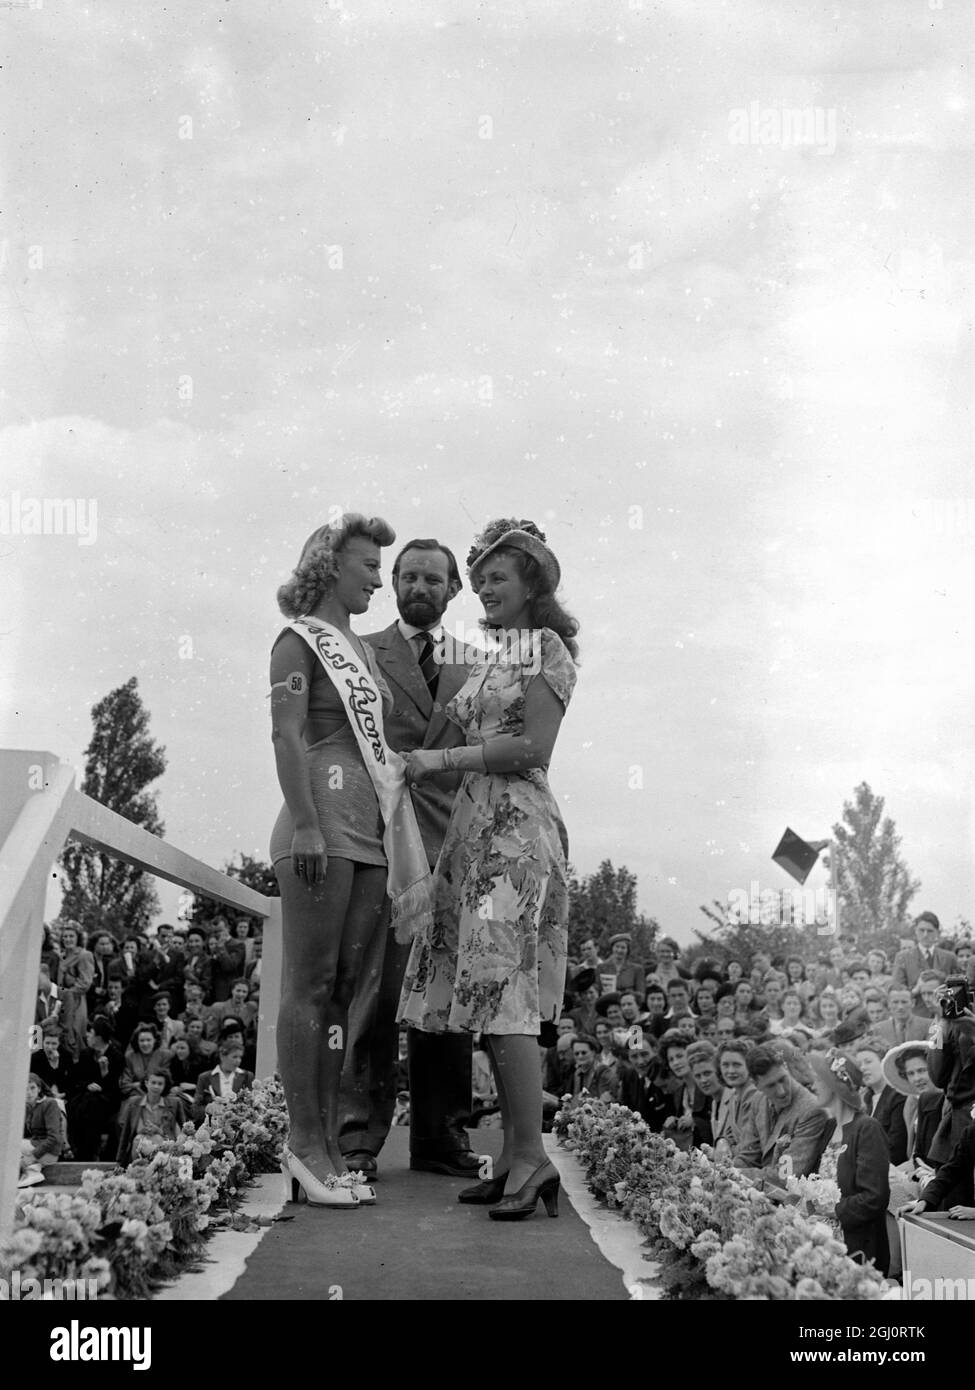 PATRICIA ROC AND TEN BEAUTY QUEENS ATTENDED LYONS CLUB ANNUAL SPORTS Ten Beauty Queens from London Boroughs attended the Lyons Club annual sports and carnival at Sudbury to-day. They served as models for Patricia Roc and Trevor Howard, who have to decide which ''Nippy'' shall be ''Miss Lyons'' of 1947. The new Lyons Queen will make a ''state drive'' round the sports arena this evening. Ten hours of carnival are provided in addition to boxing, diving and swimming displays. The evening closes with a fireworks display. Photo Shows: Patricia Roc and Trevor Howard with the winner of this year's ''M Stock Photo